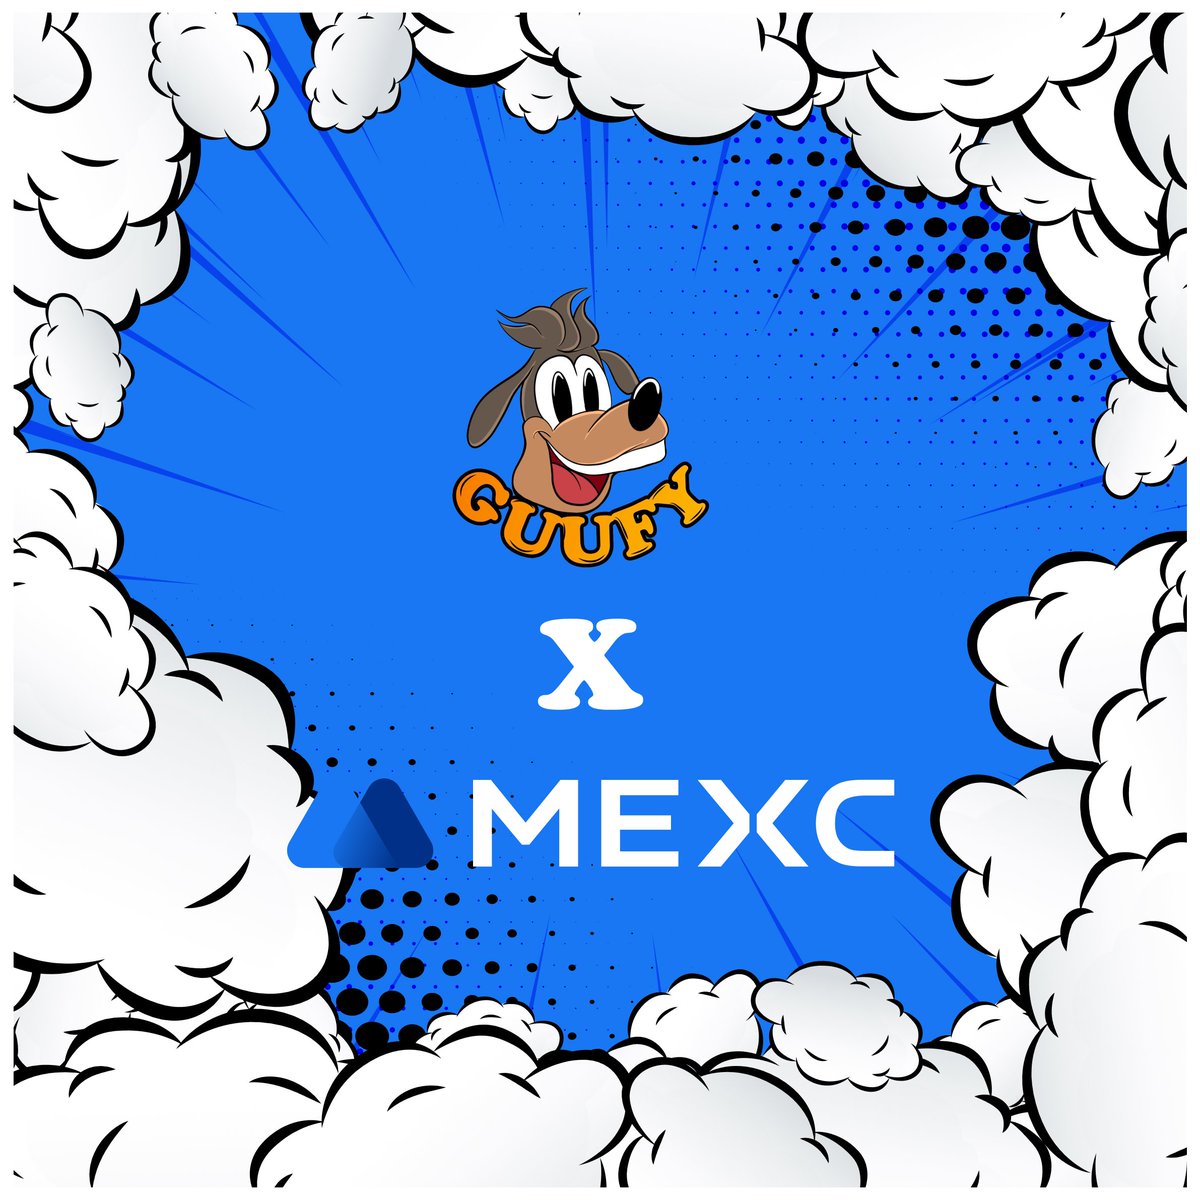 Today's the day! 🚀 $GUUFY goes live on MEXC at 1 PM UTC! Don't miss out—set your alarms and get ready to trade. Join us as we take this exciting step forward! 📈 #MEXC #MEXCKickstarter